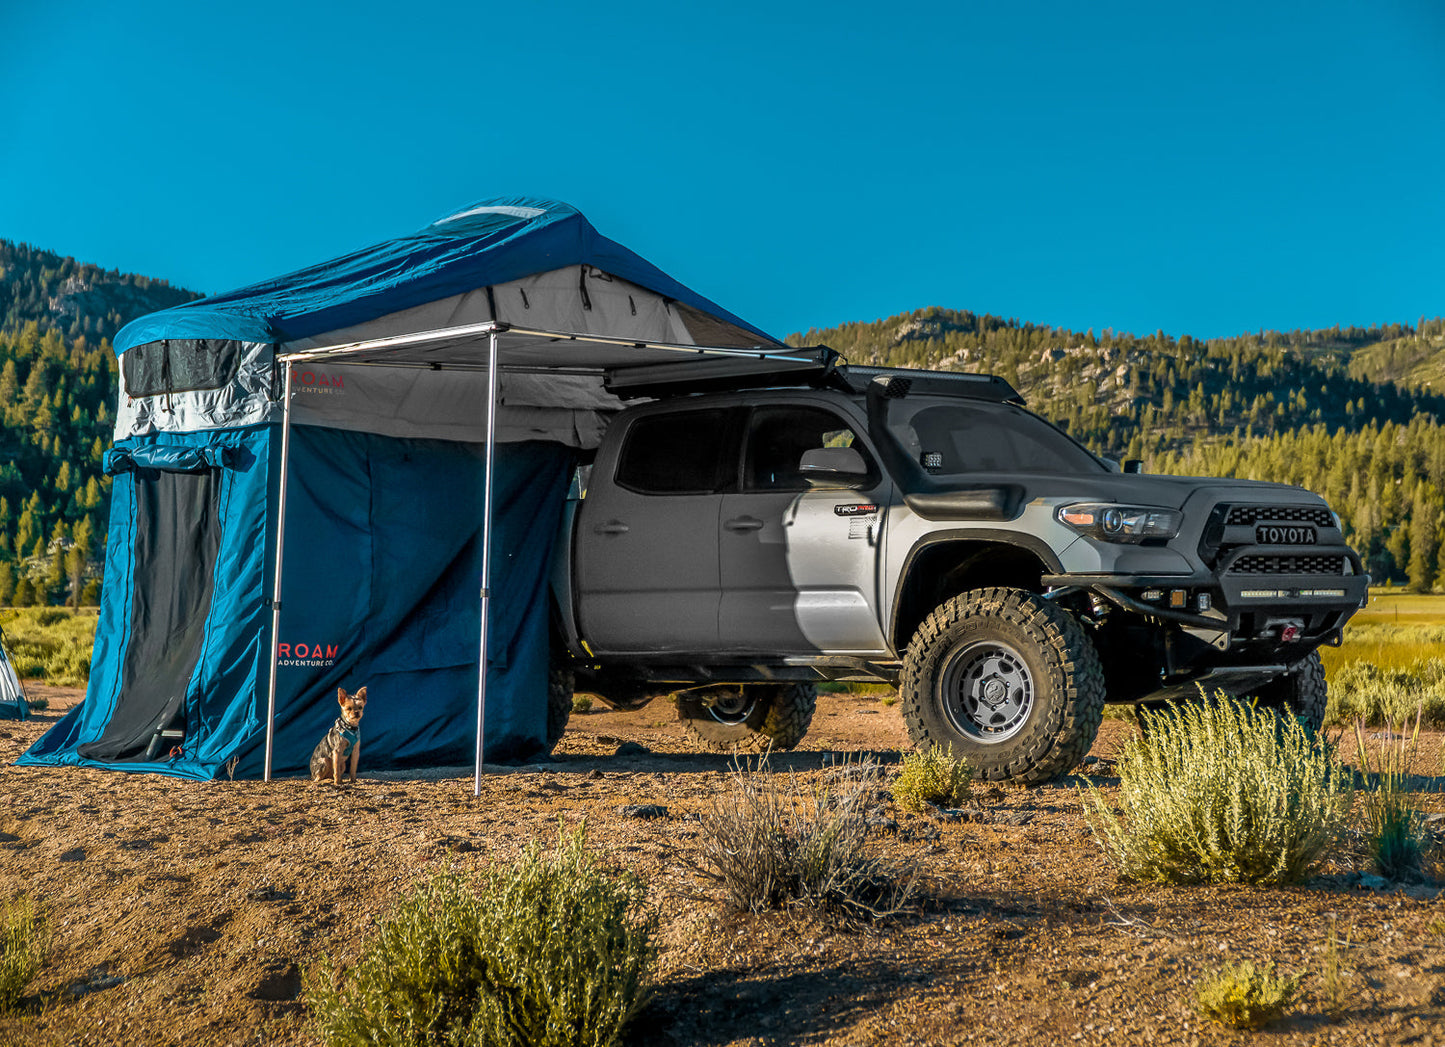 Rooftop Awnings by ROAM Adventure Co.